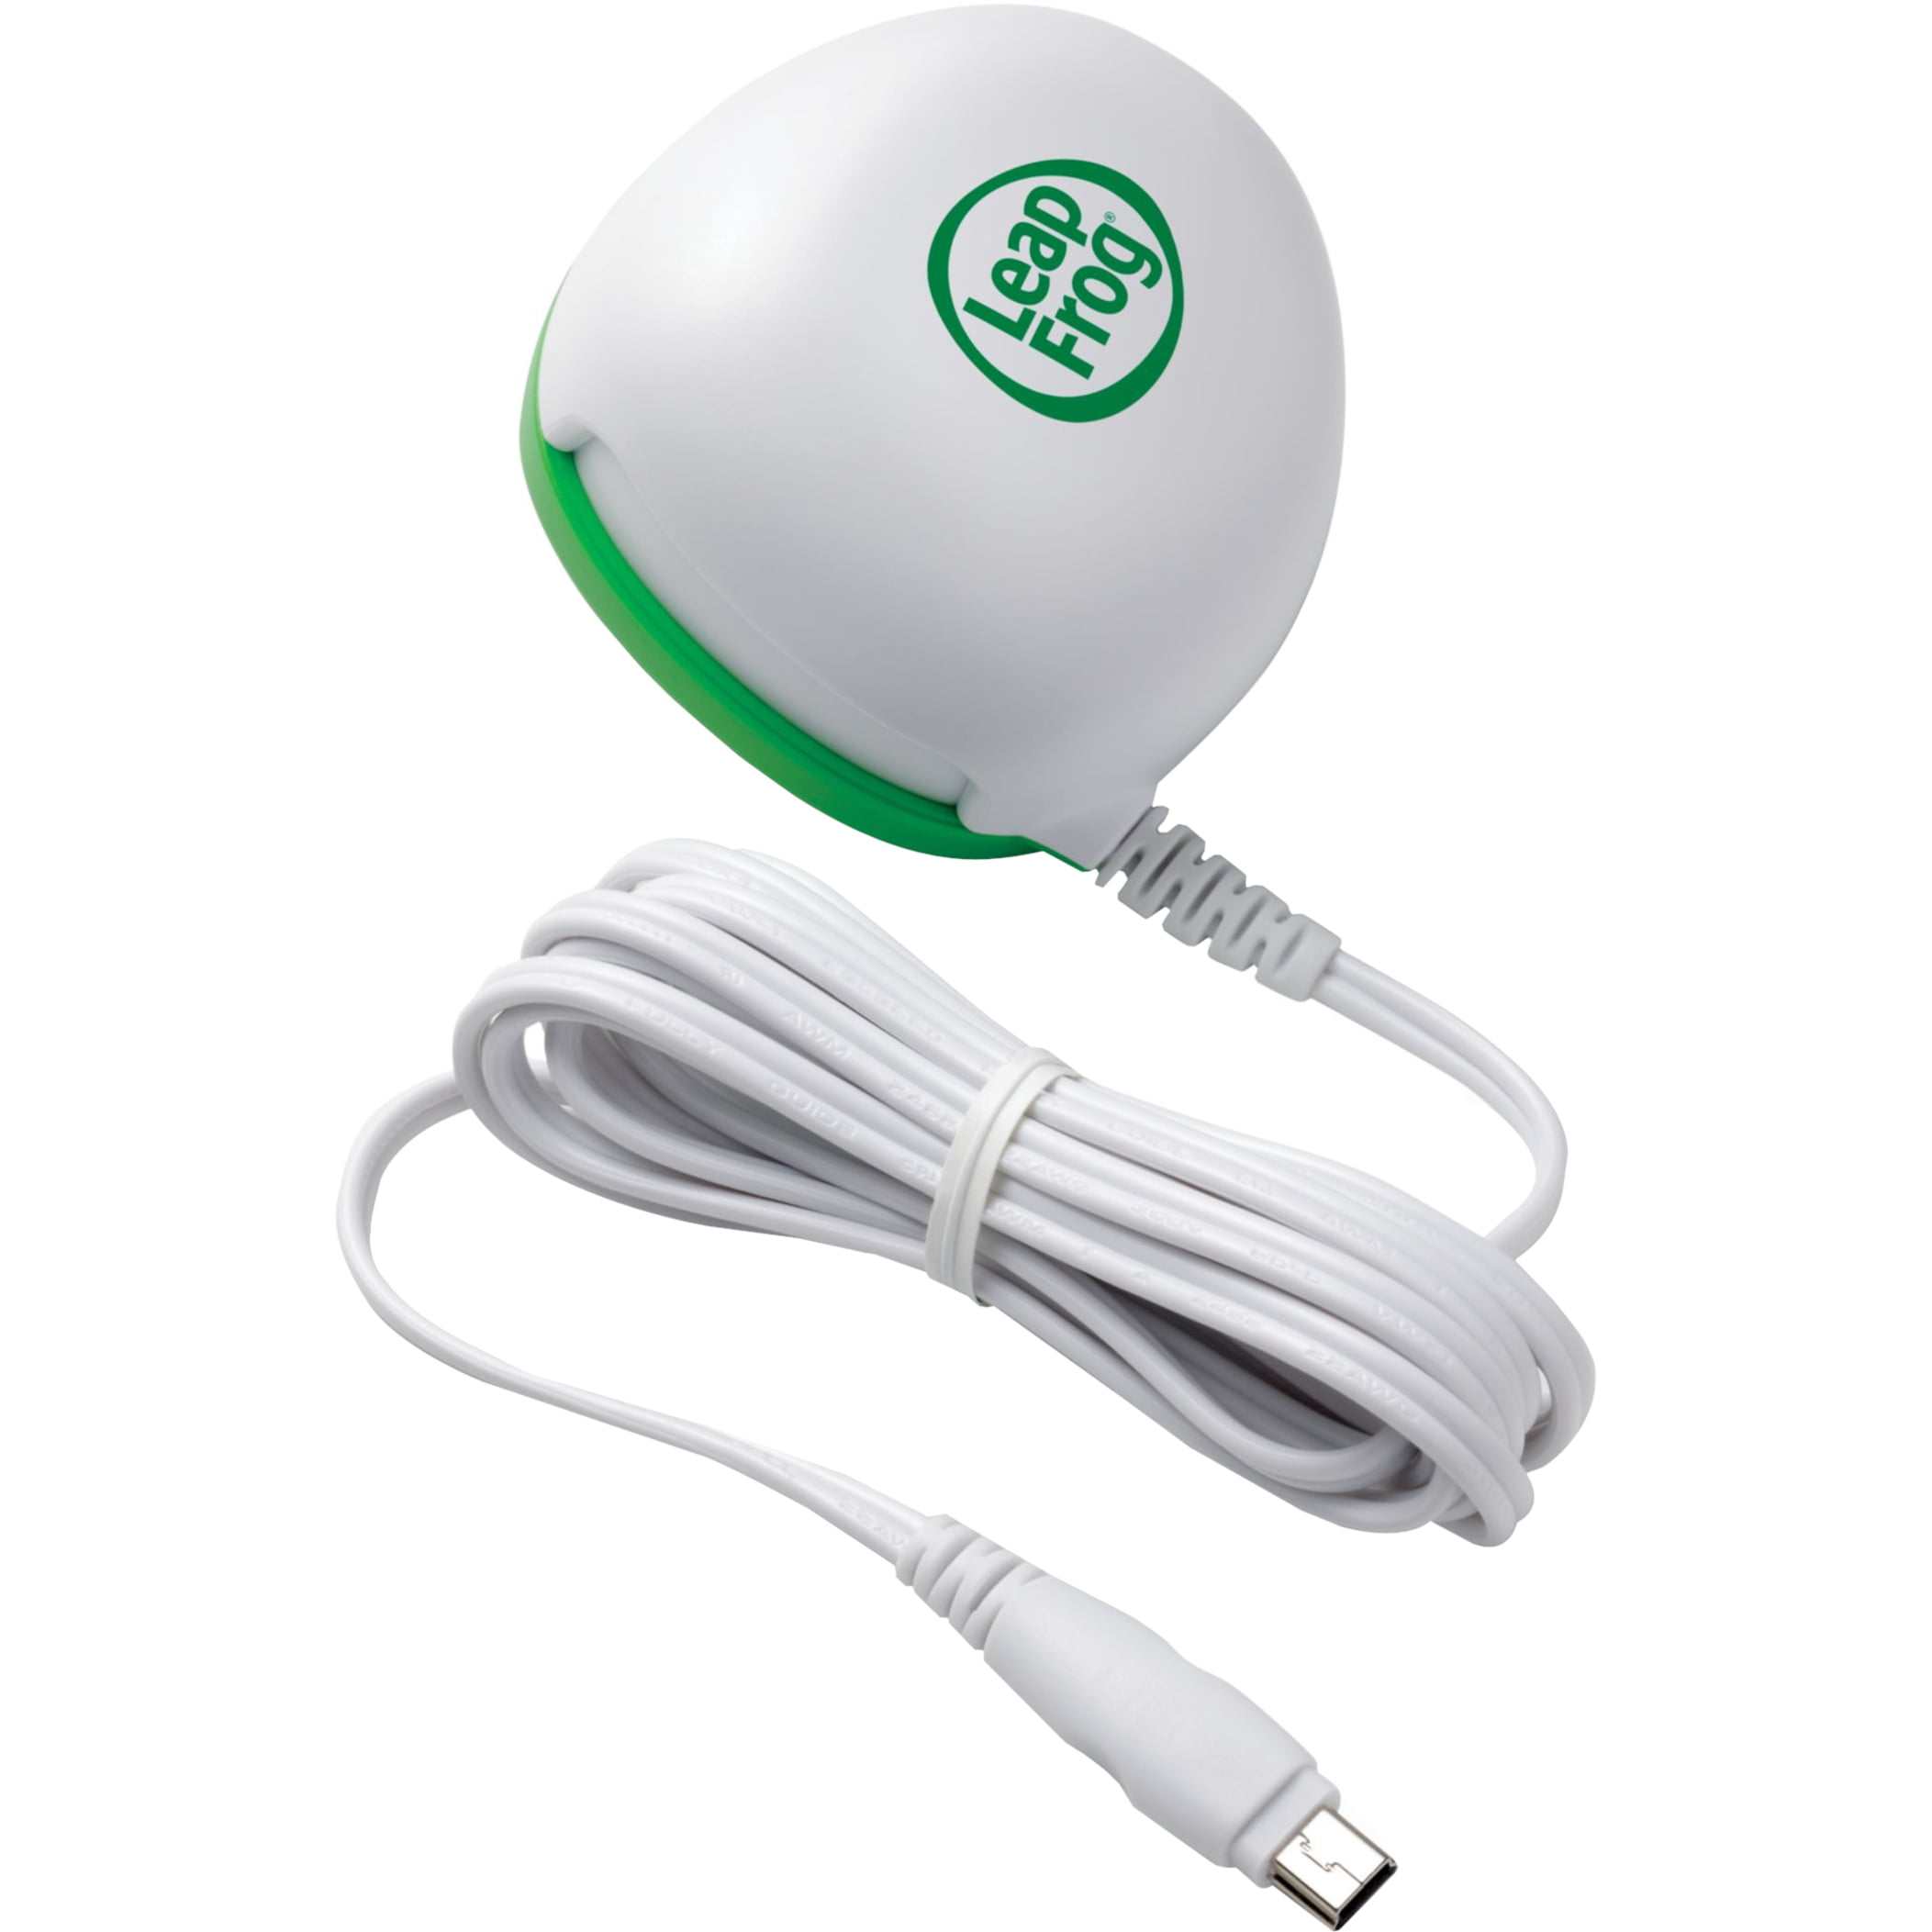 5x Genuine AD529 LeapFrog AC Power Adapter for LeapPad Ultra and LeapReader for sale online 